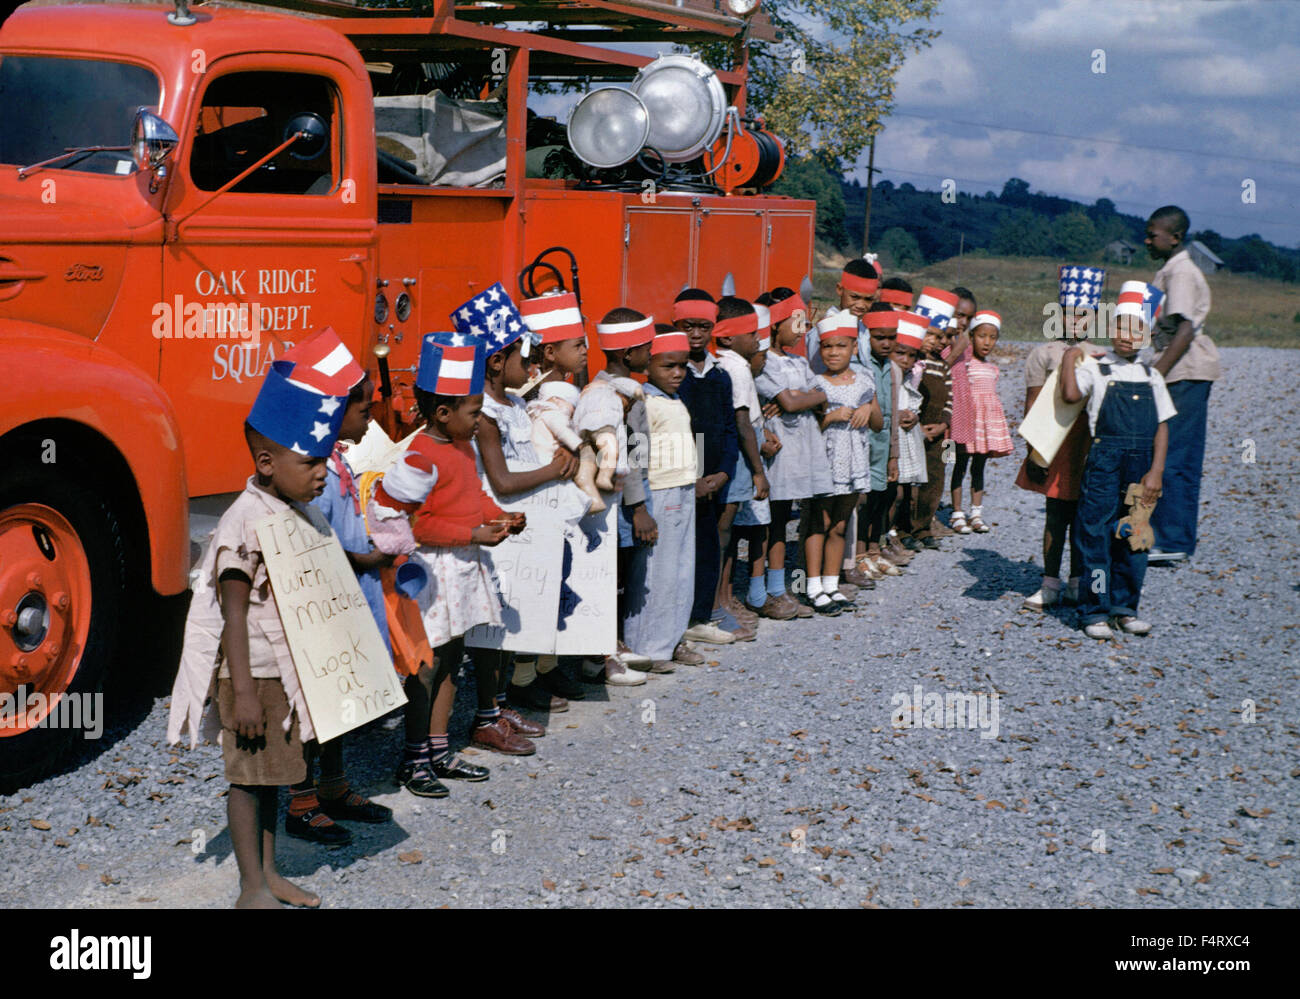 Fire truck and kids. 1943.Oak Ridge. The town of Oak Ridge was established by the Army Corps of Engineers as part of the Clinton Stock Photo